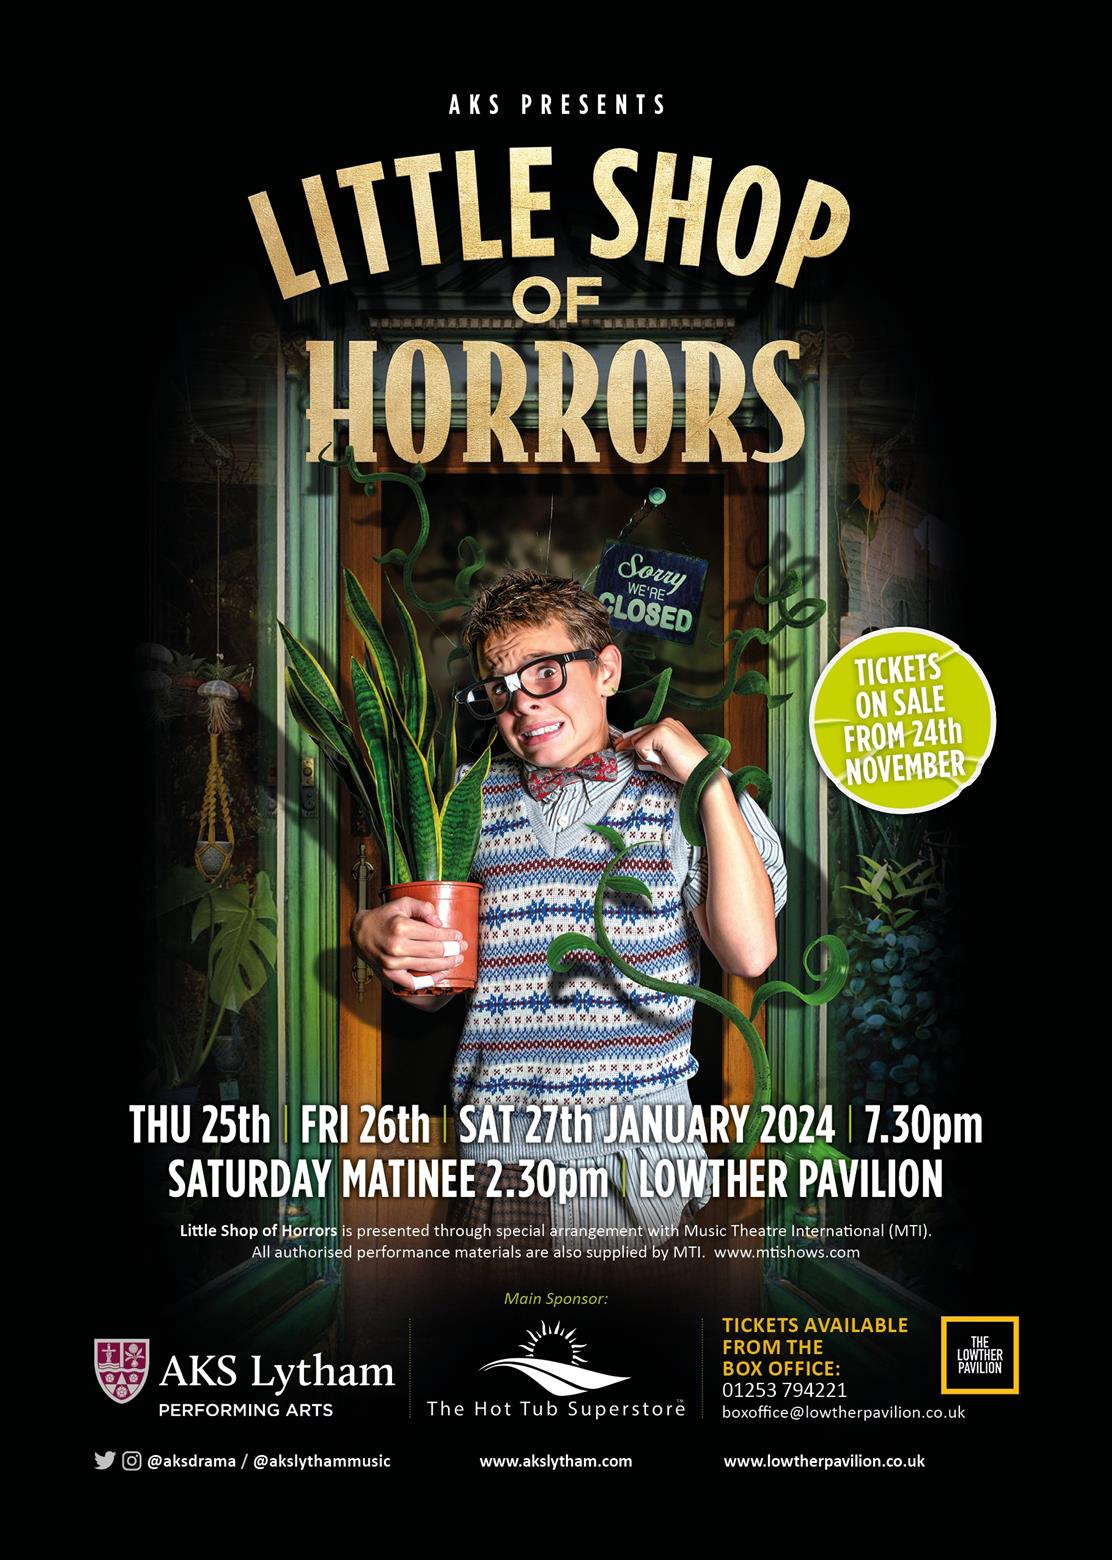 AKS presents Little Shop of Horrors at Lowther Pavillion